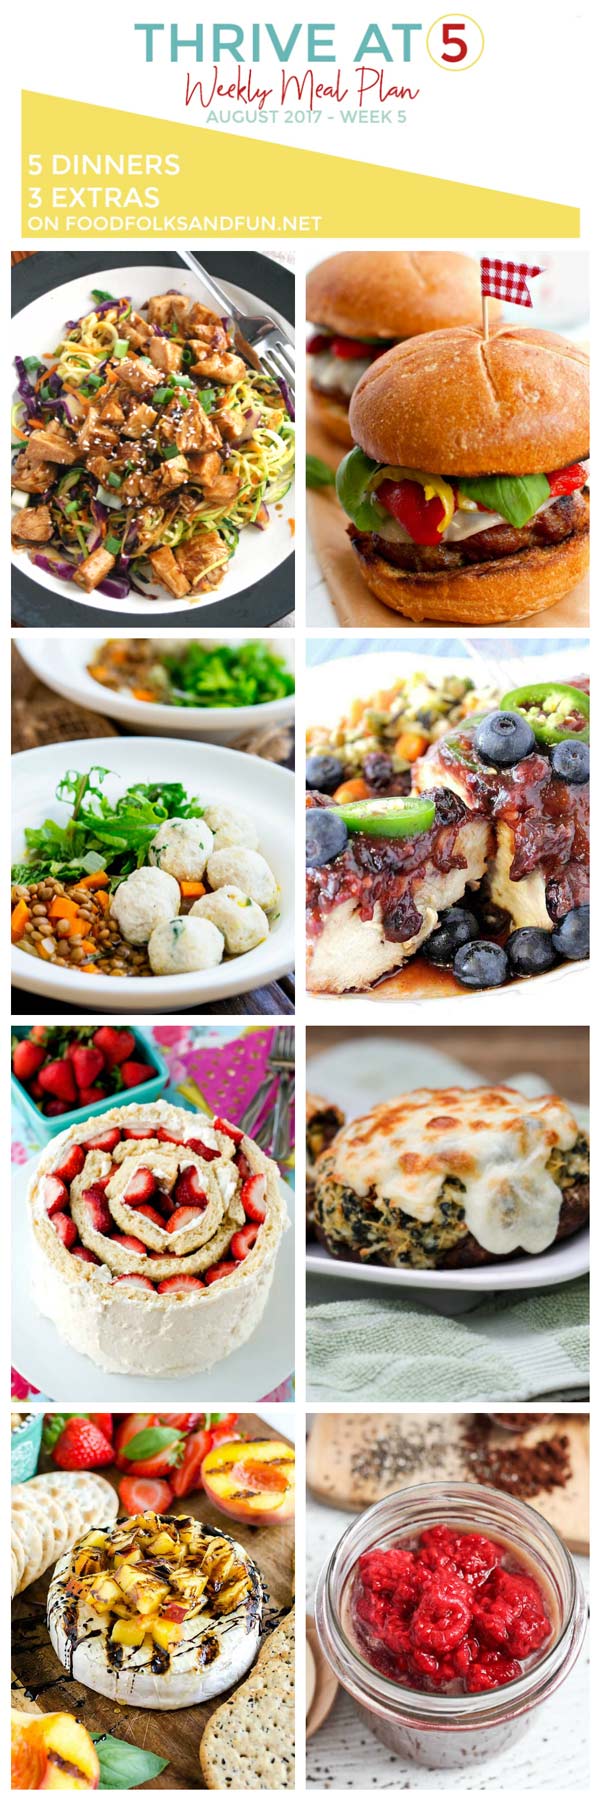 Here's the Weekly Meal Plan for July, Week 5. 5 dinners and 3 extra recipes to make your weekly meal planning a whole lot easier! via @foodfolksandfun